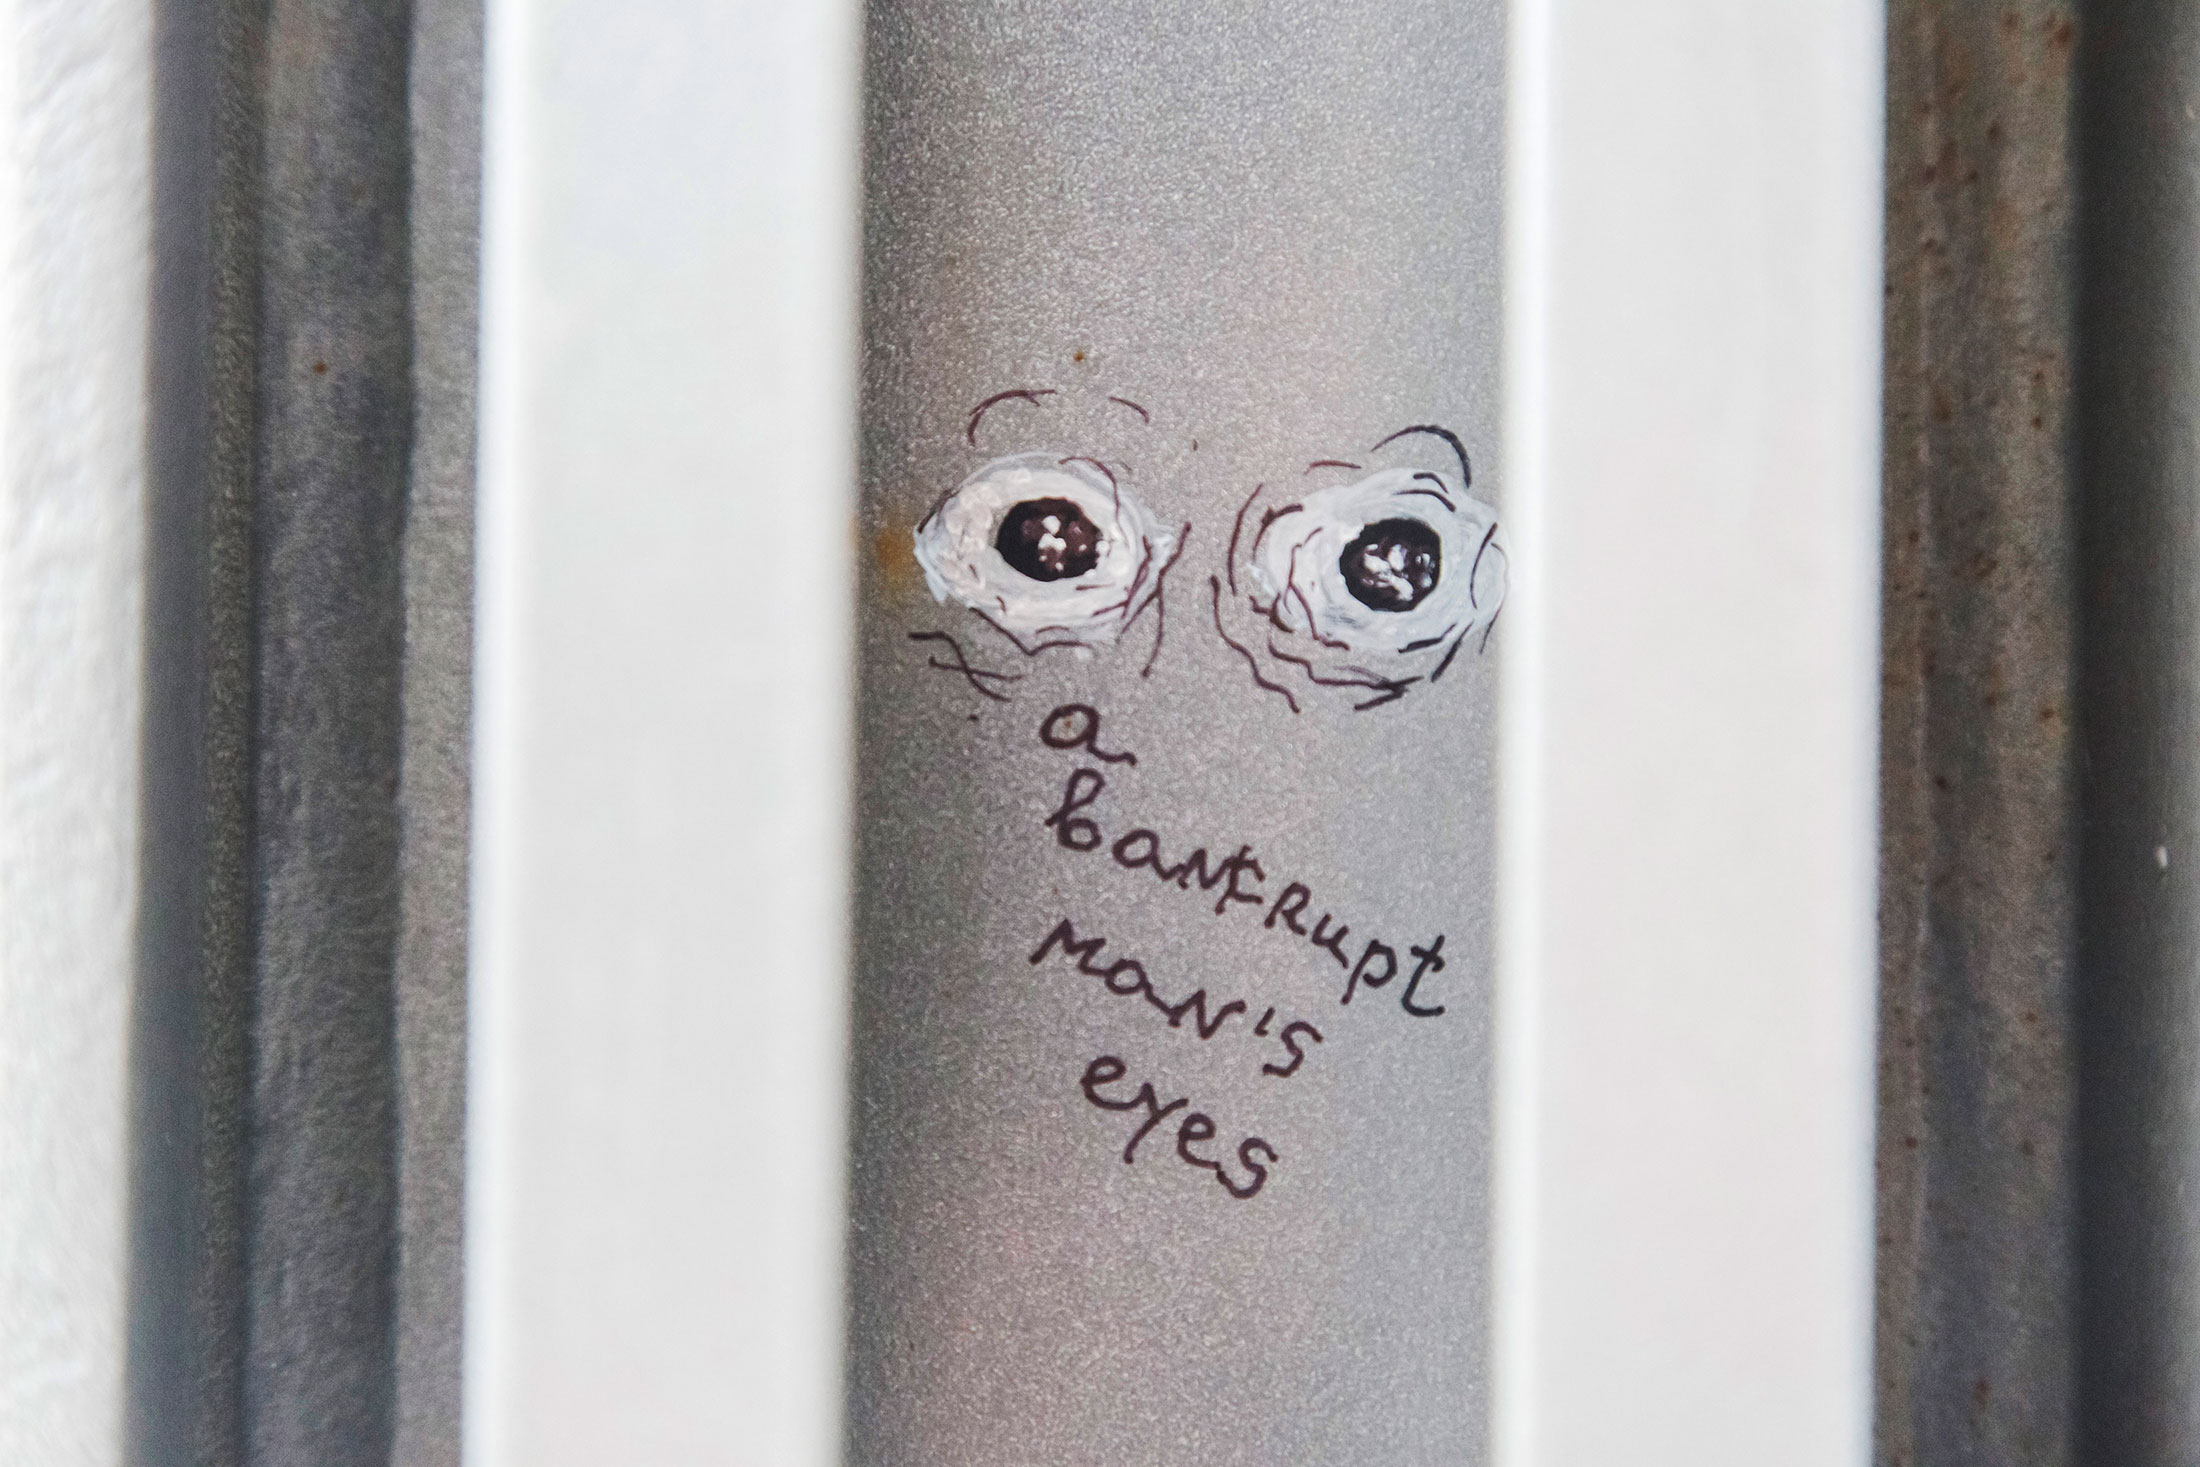 The words &quot;a bankrupt man's eyes&quot; written by artist Nedko Solakov adorn a wall in the atrium of the European Central Bank (ECB) headquarters in Frankfurt, Germany, on Wednesday, Oct. 21, 2015.
